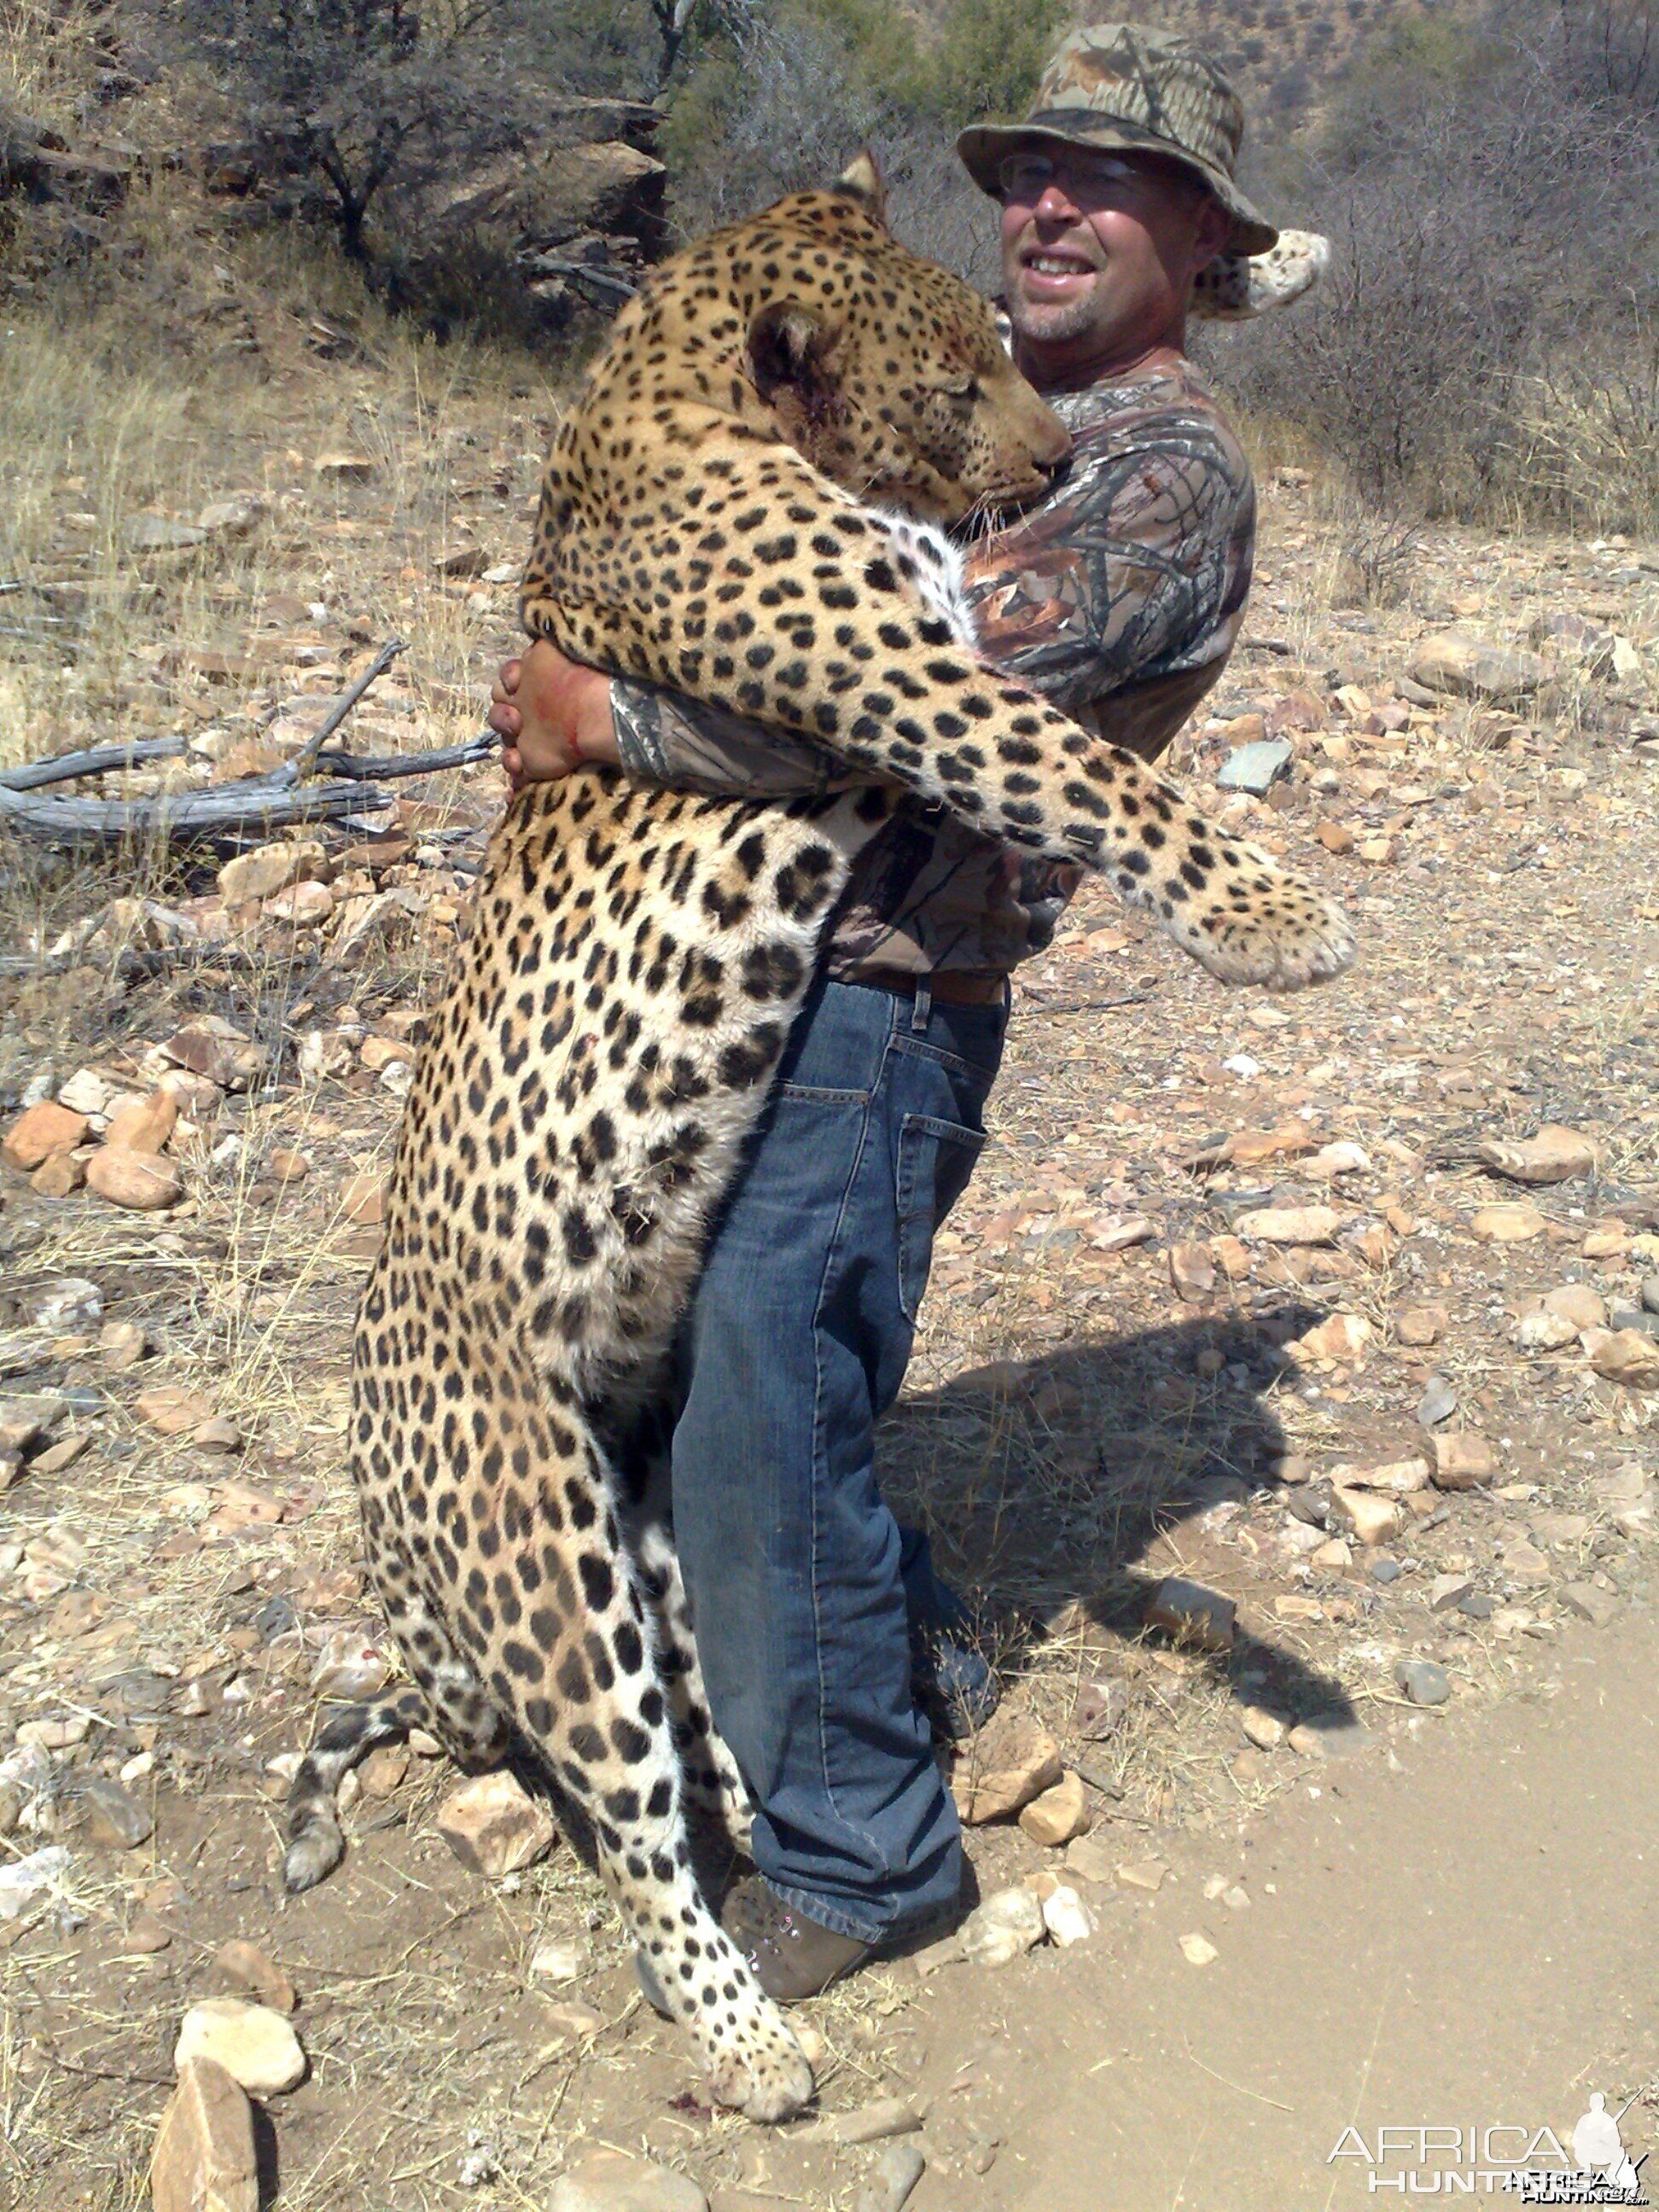 Another Namibian Monster tracked by Sparks Hounds